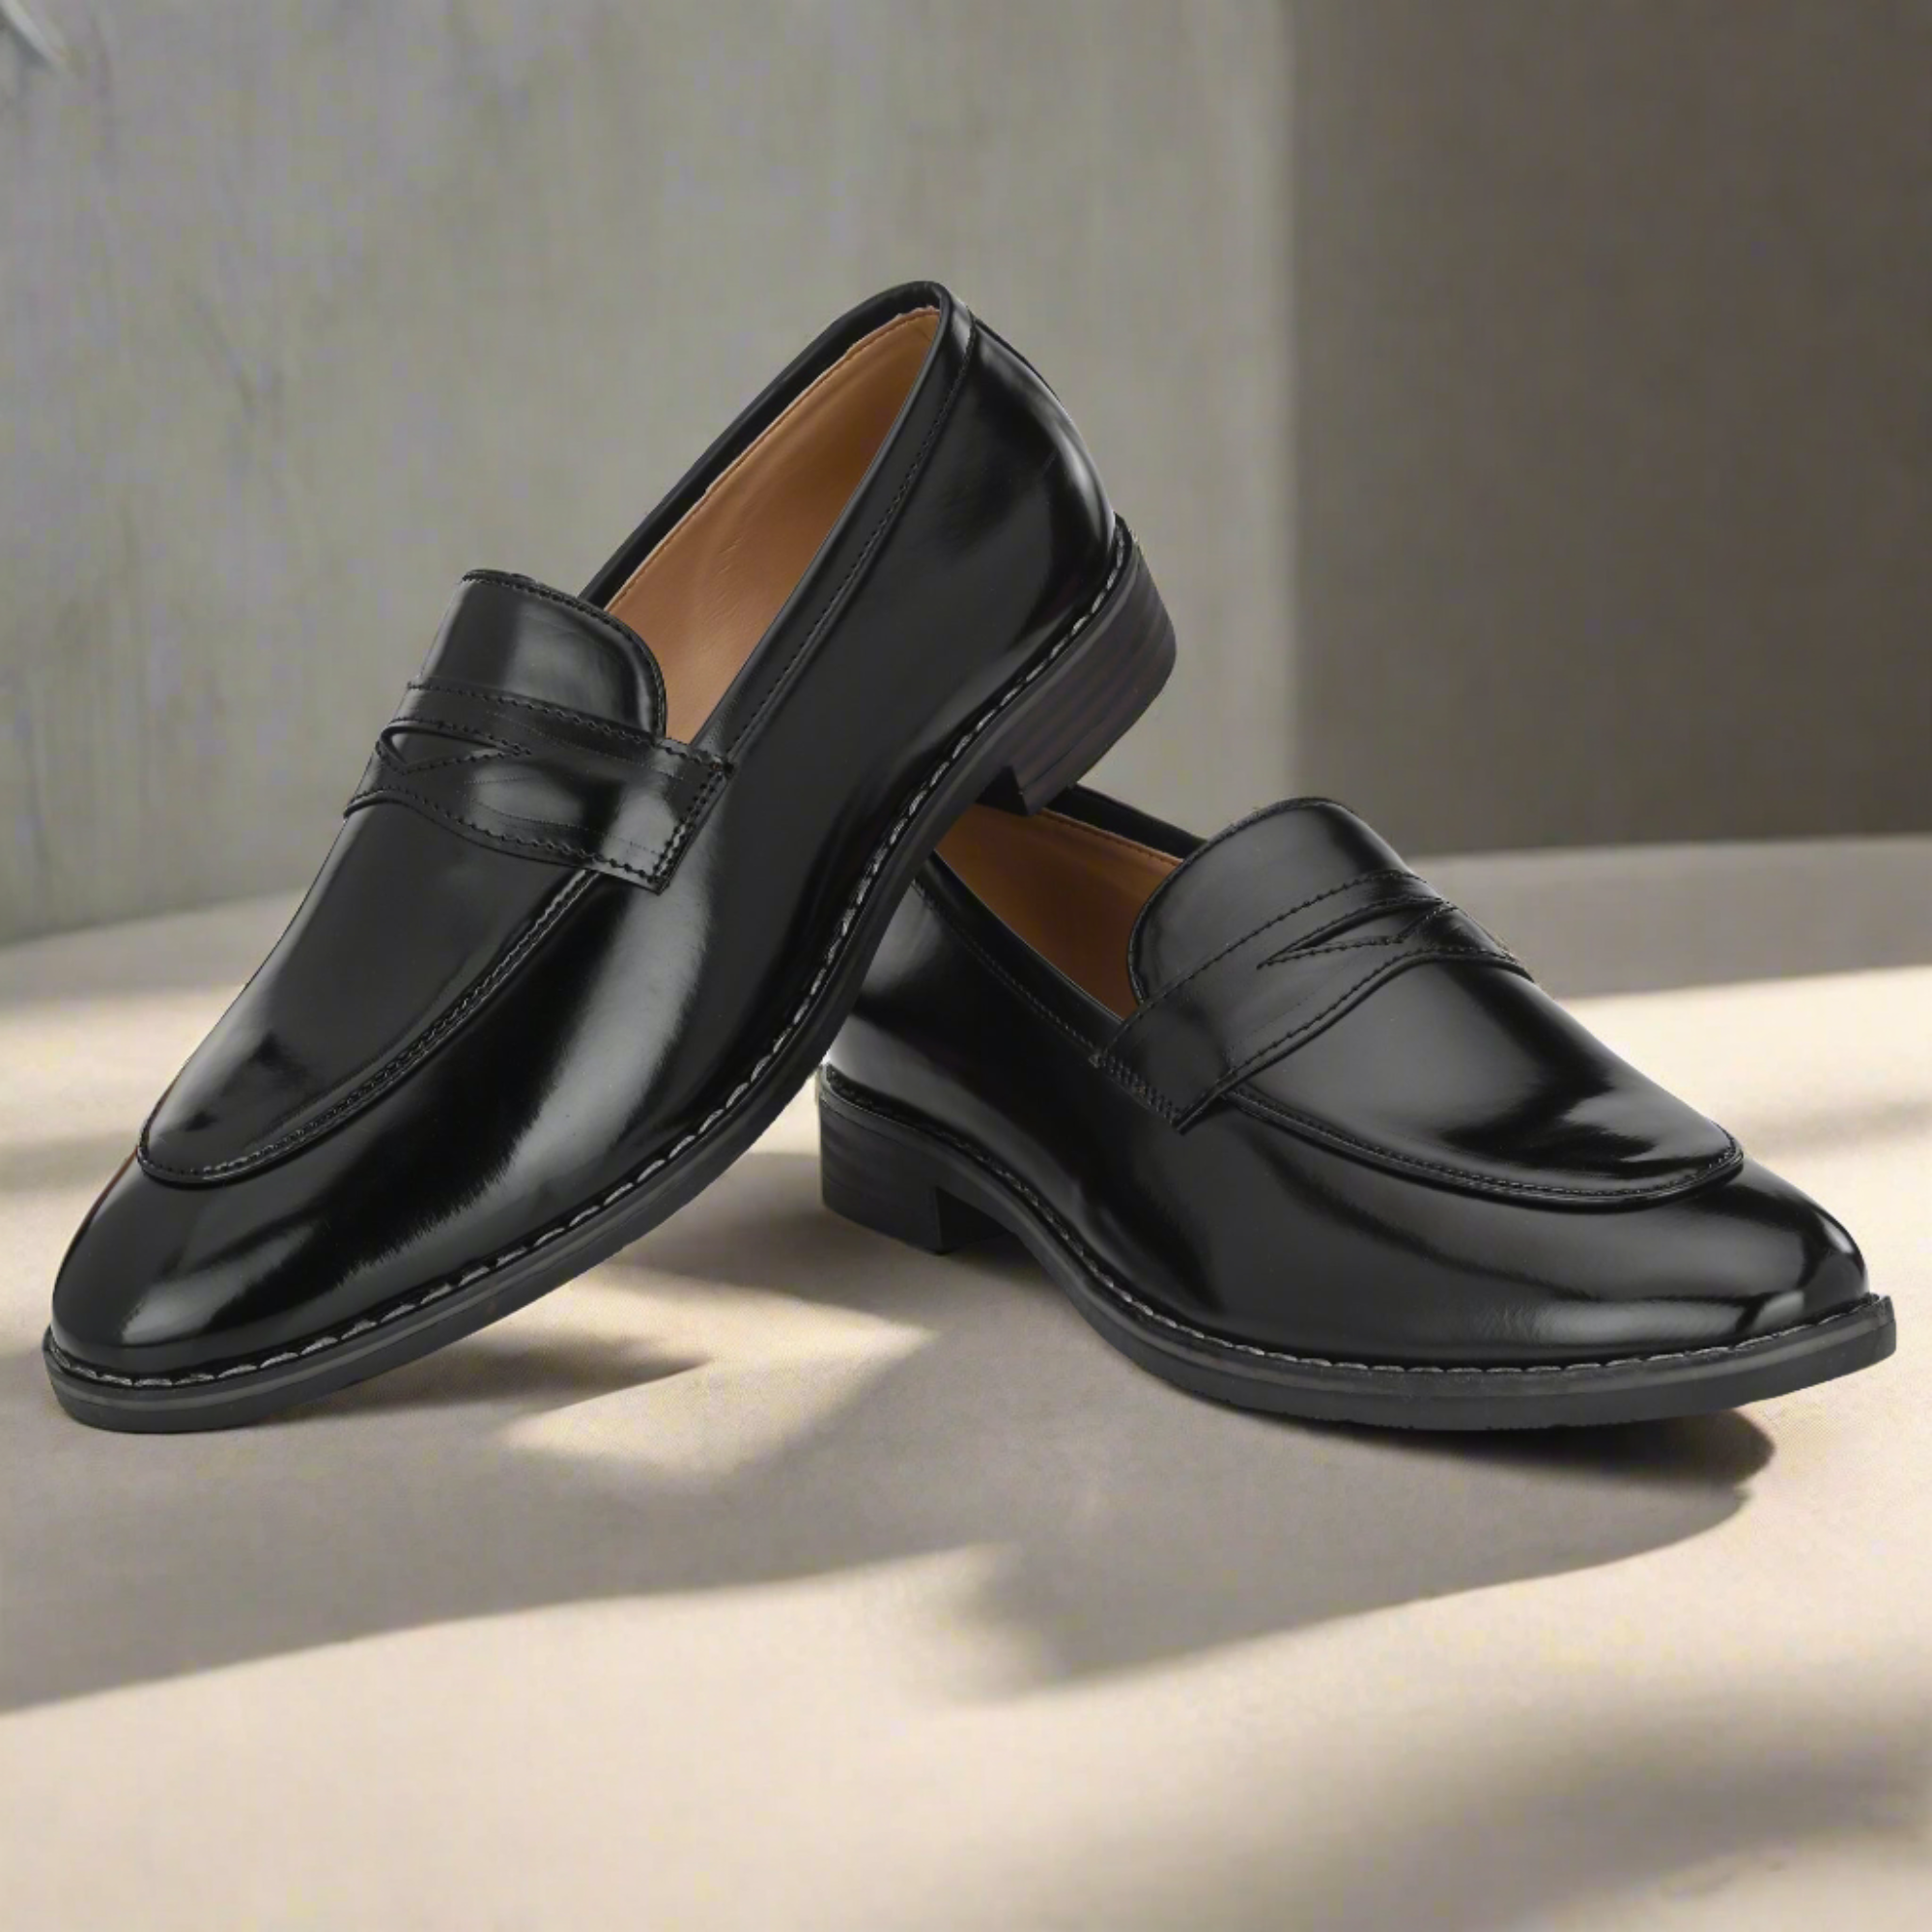 Attitudist Unisex Handcrafted Glossy Black Penny Loafer With Double Stitched Welts